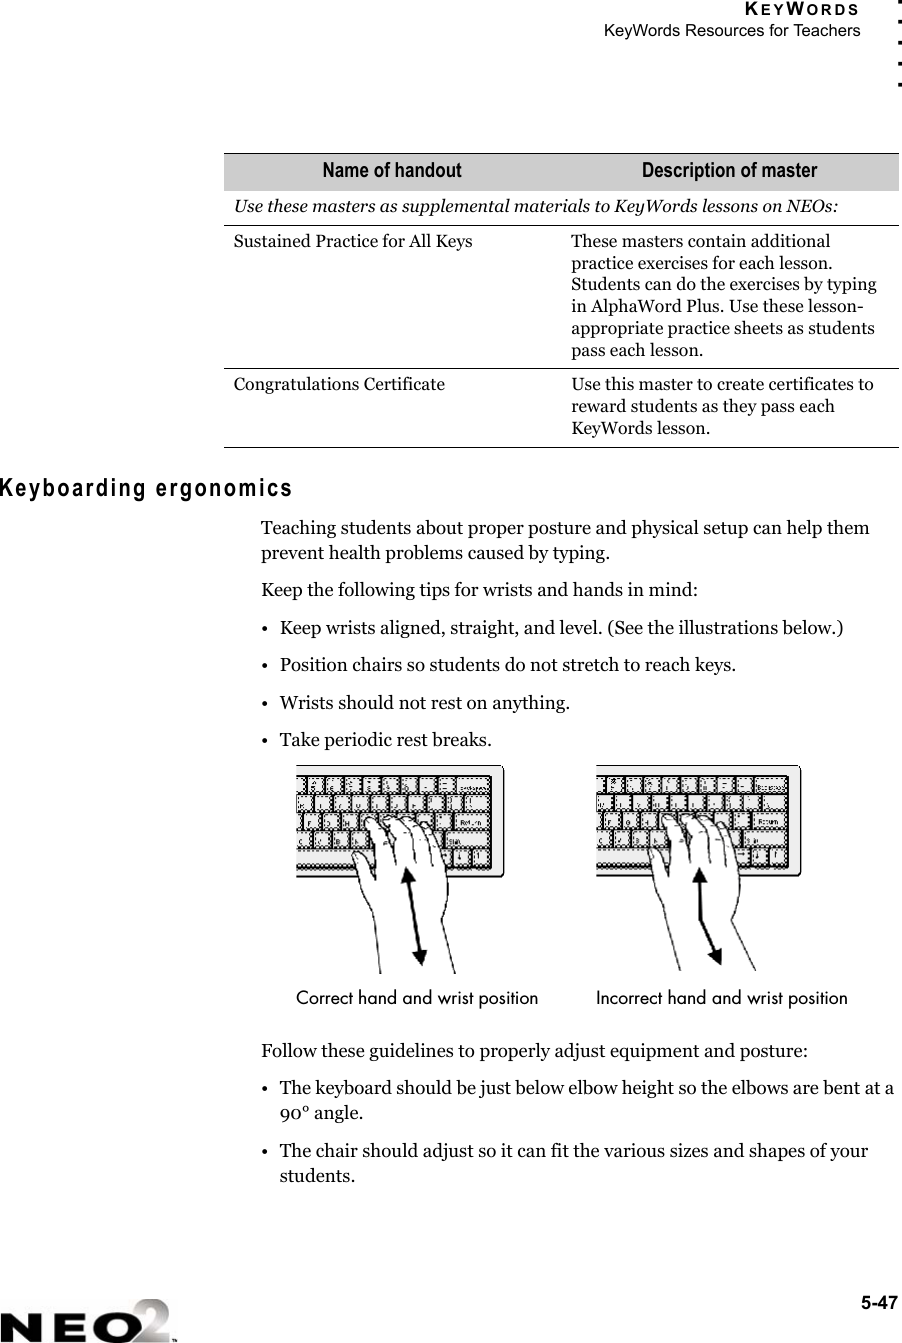 KEYWORDSKeyWords Resources for Teachers5-47. . . . .Keyboarding ergonomicsTeaching students about proper posture and physical setup can help them prevent health problems caused by typing. Keep the following tips for wrists and hands in mind:• Keep wrists aligned, straight, and level. (See the illustrations below.)• Position chairs so students do not stretch to reach keys.• Wrists should not rest on anything.• Take periodic rest breaks.Follow these guidelines to properly adjust equipment and posture:• The keyboard should be just below elbow height so the elbows are bent at a 90° angle. • The chair should adjust so it can fit the various sizes and shapes of your students.Use these masters as supplemental materials to KeyWords lessons on NEOs:Sustained Practice for All Keys These masters contain additional practice exercises for each lesson. Students can do the exercises by typing in AlphaWord Plus. Use these lesson-appropriate practice sheets as students pass each lesson.Congratulations Certificate Use this master to create certificates to reward students as they pass each KeyWords lesson.Name of handout Description of masterCorrect hand and wrist position Incorrect hand and wrist position